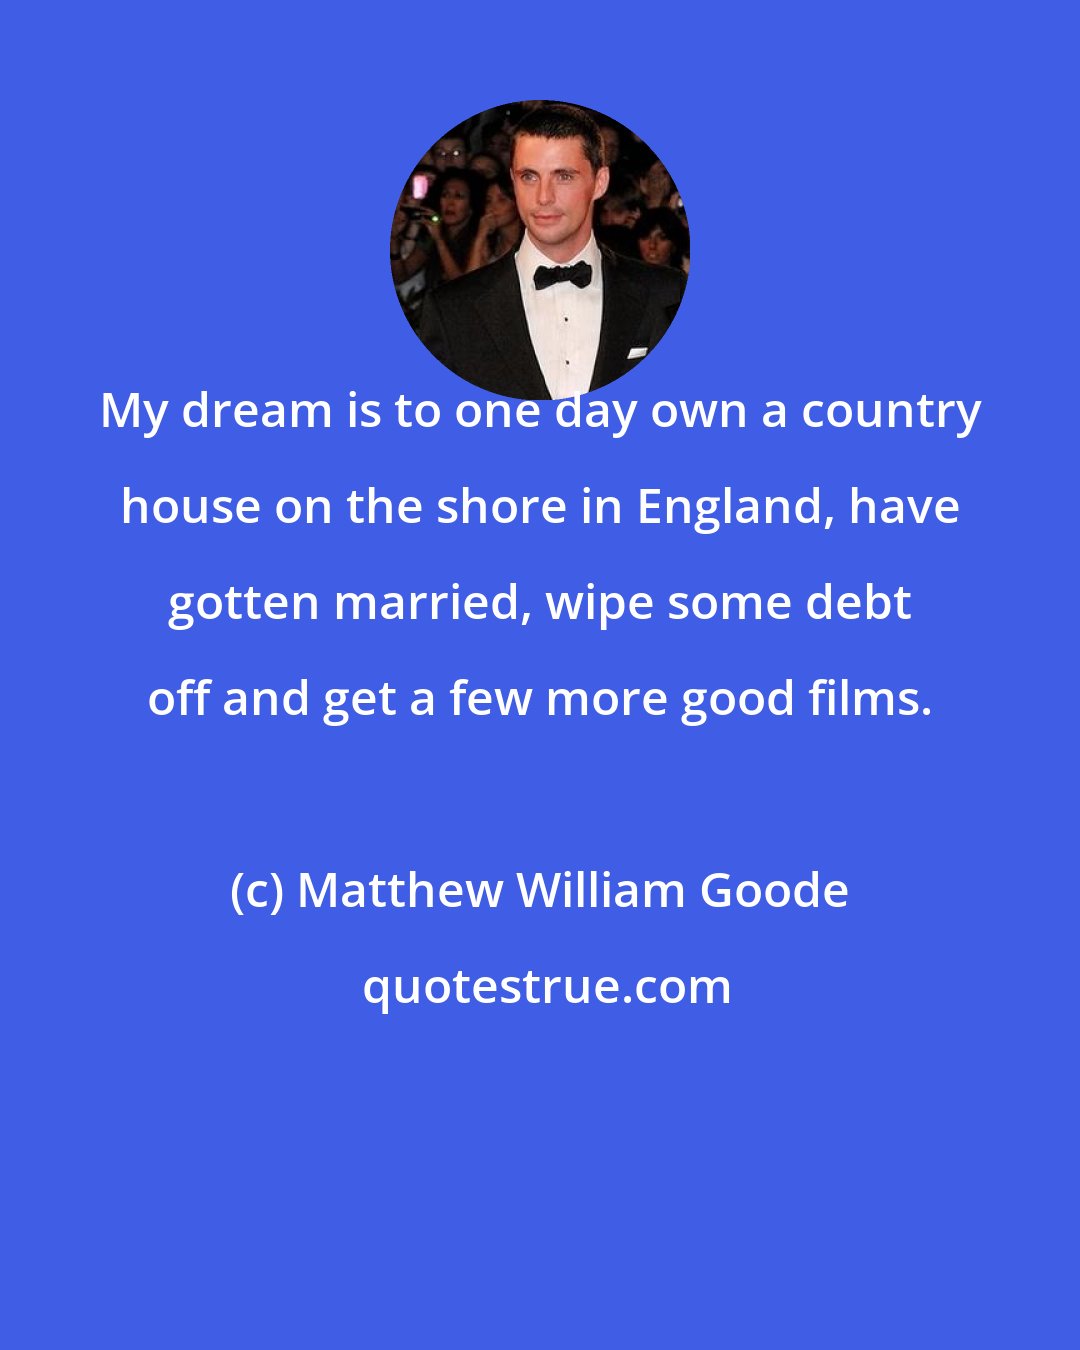 Matthew William Goode: My dream is to one day own a country house on the shore in England, have gotten married, wipe some debt off and get a few more good films.